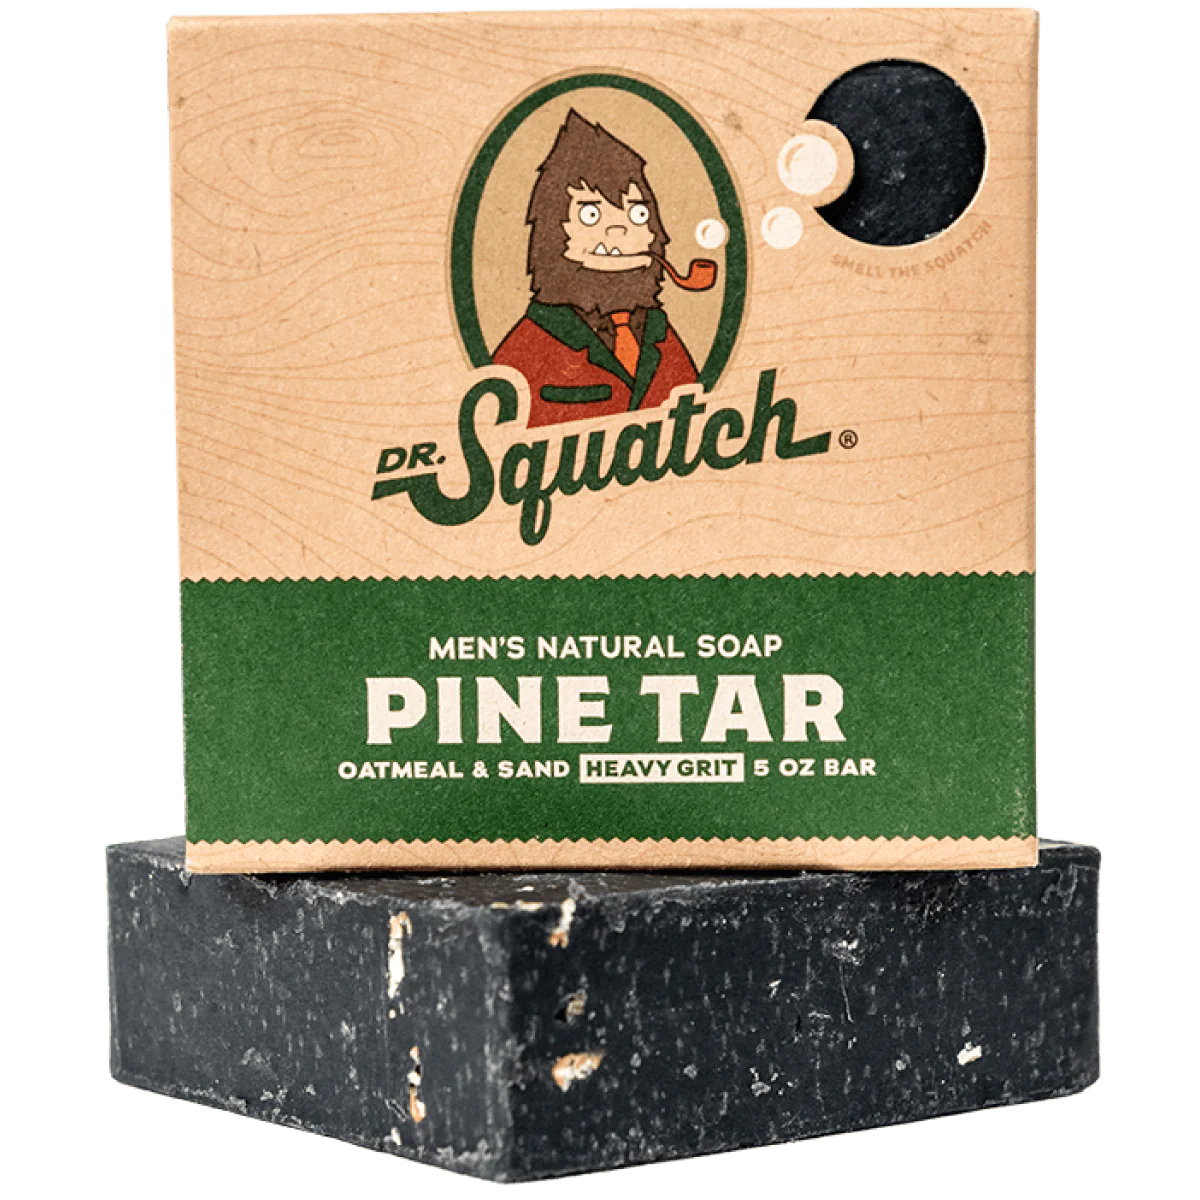 Dr. Squatch Soap Frosty Peppermint & Snowy Pine Tar Limited Edition Holiday  Set